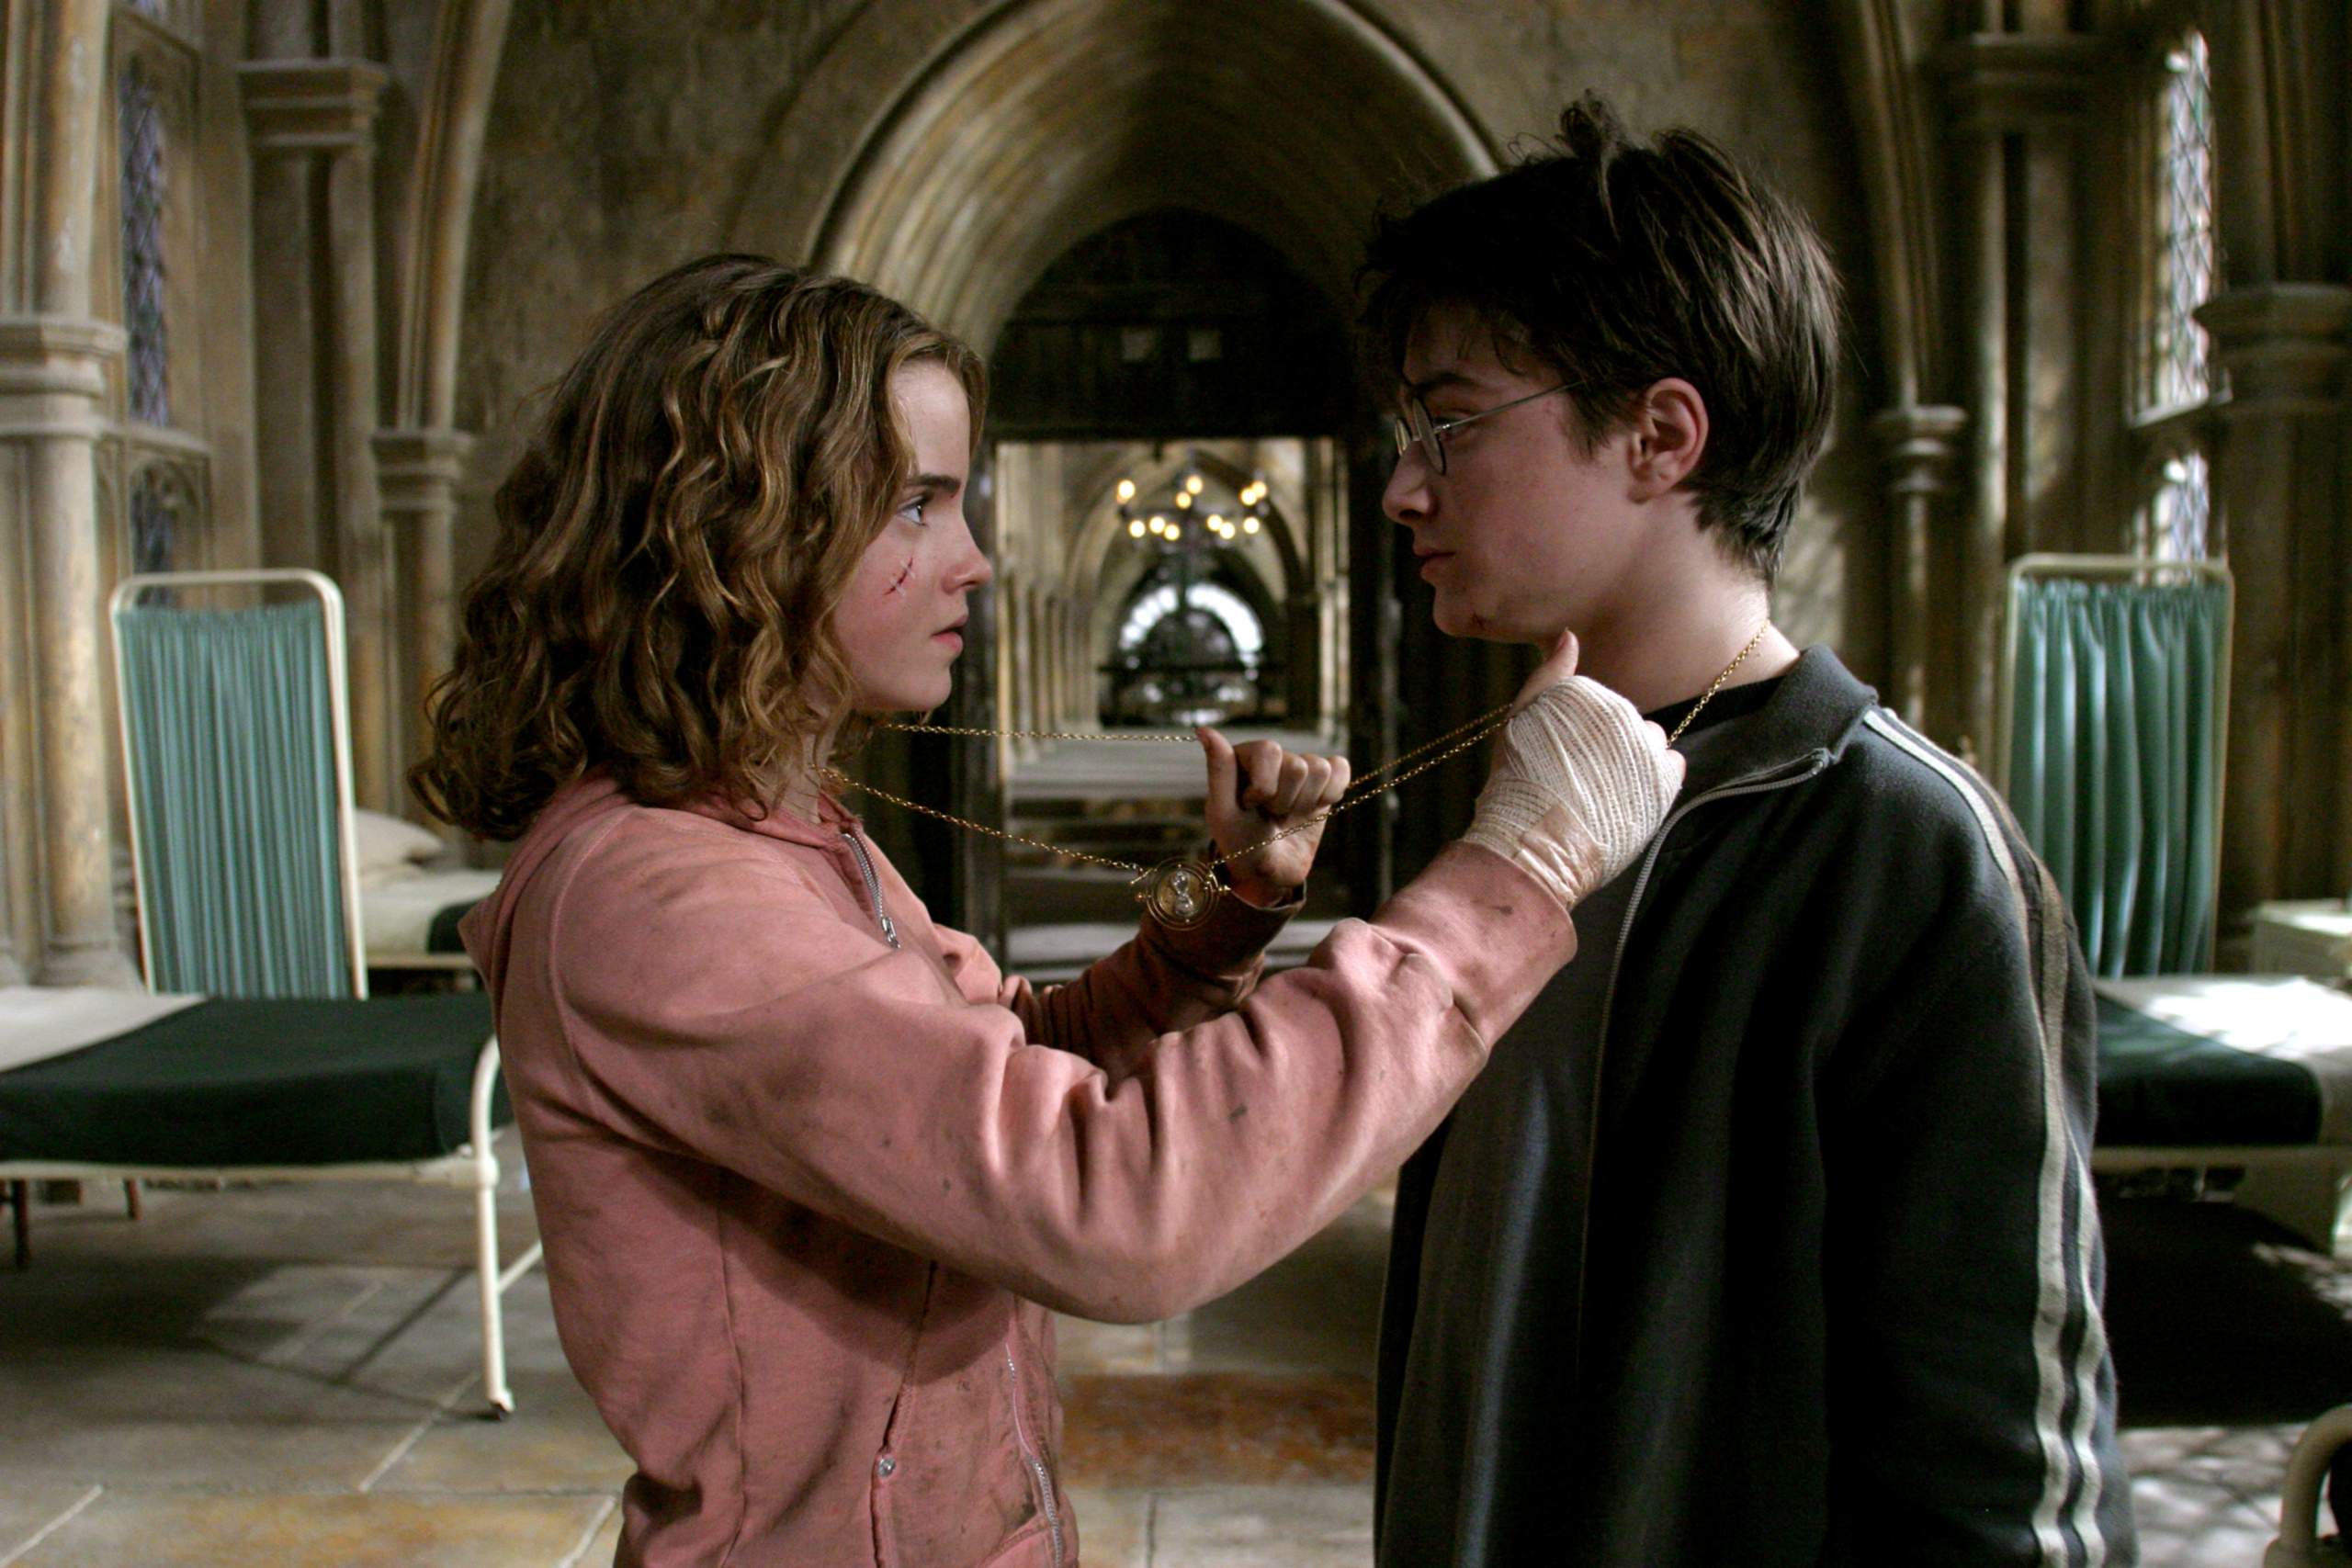 We often hear about people having movie marathons. From a content standpoint, many opt to binge-watch all eight of the <em>Harry Potter</em> films one after another. While it sounds good in theory, have you wondered how long it would take to watch all of the films consecutively? Collectively, all of the films combine to be 1,169 minutes in length. If you want to do this marathon, you better put a pot of coffee on. It'll take roughly 20 hours in total.